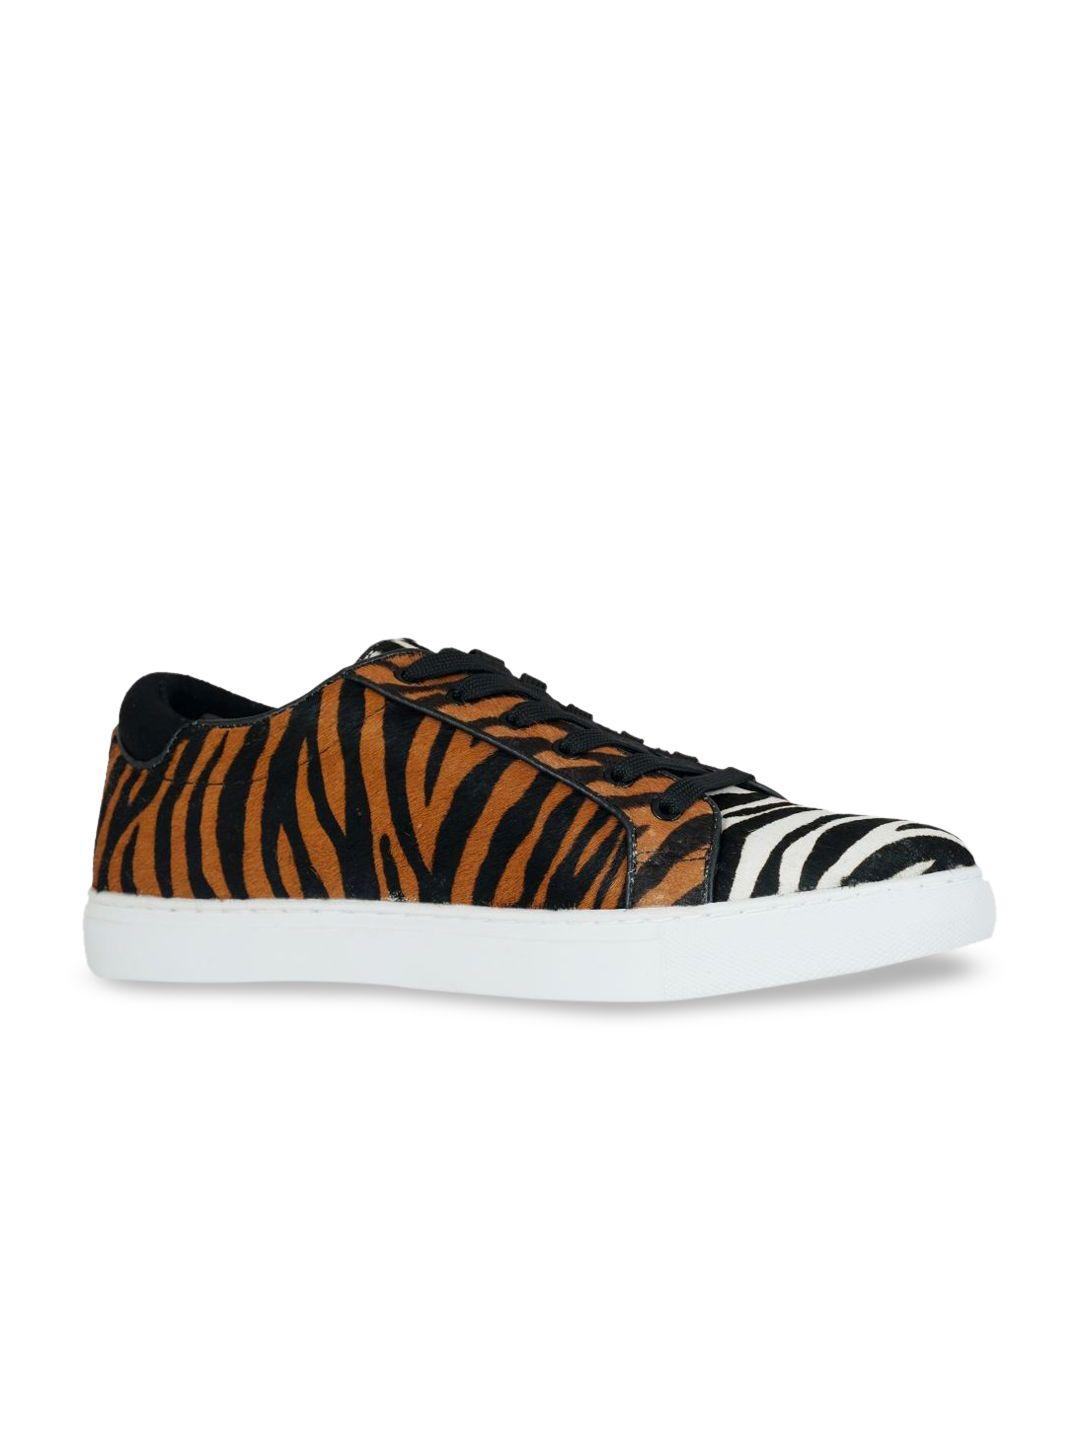 kenneth-cole-women-black-&-brown-animal-print-leather-sneakers